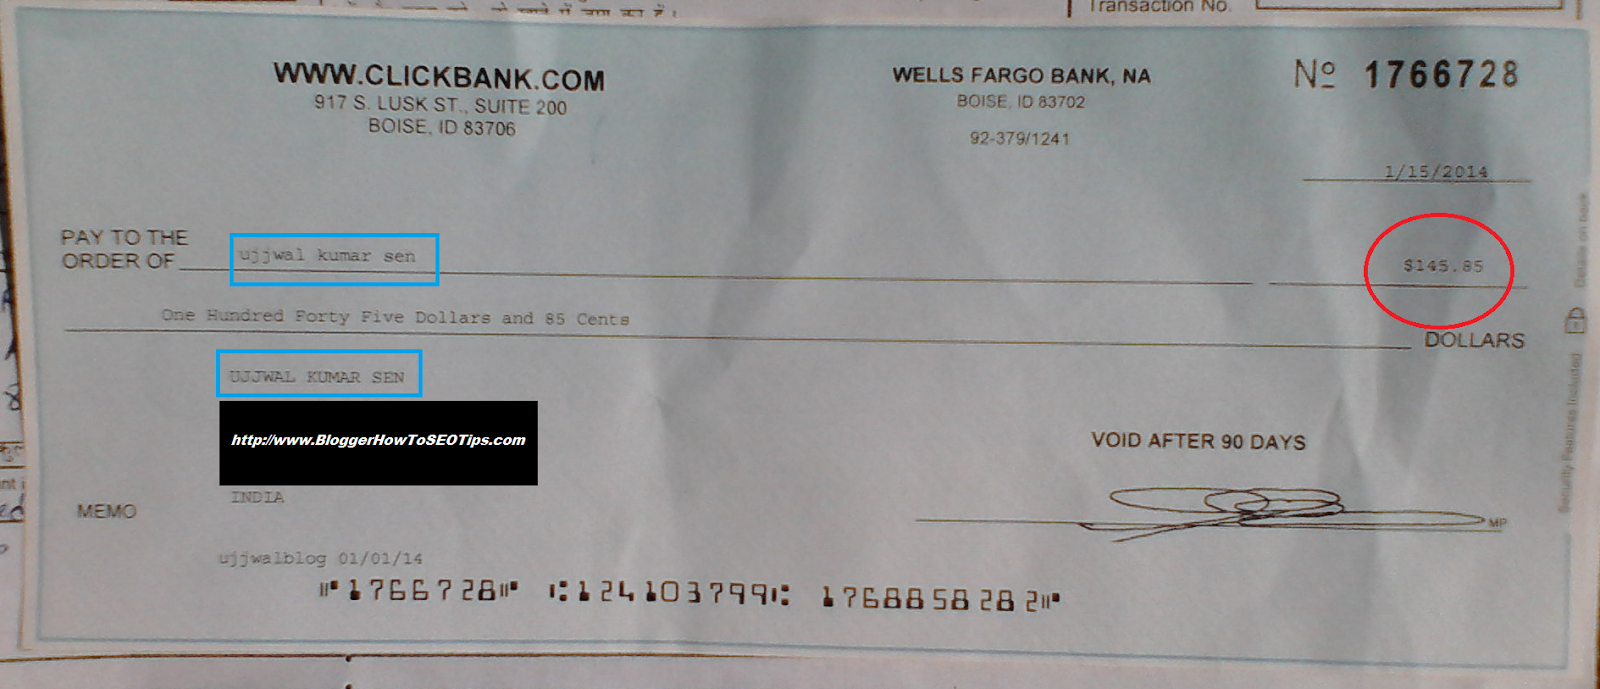 First ClickBank Cheque India